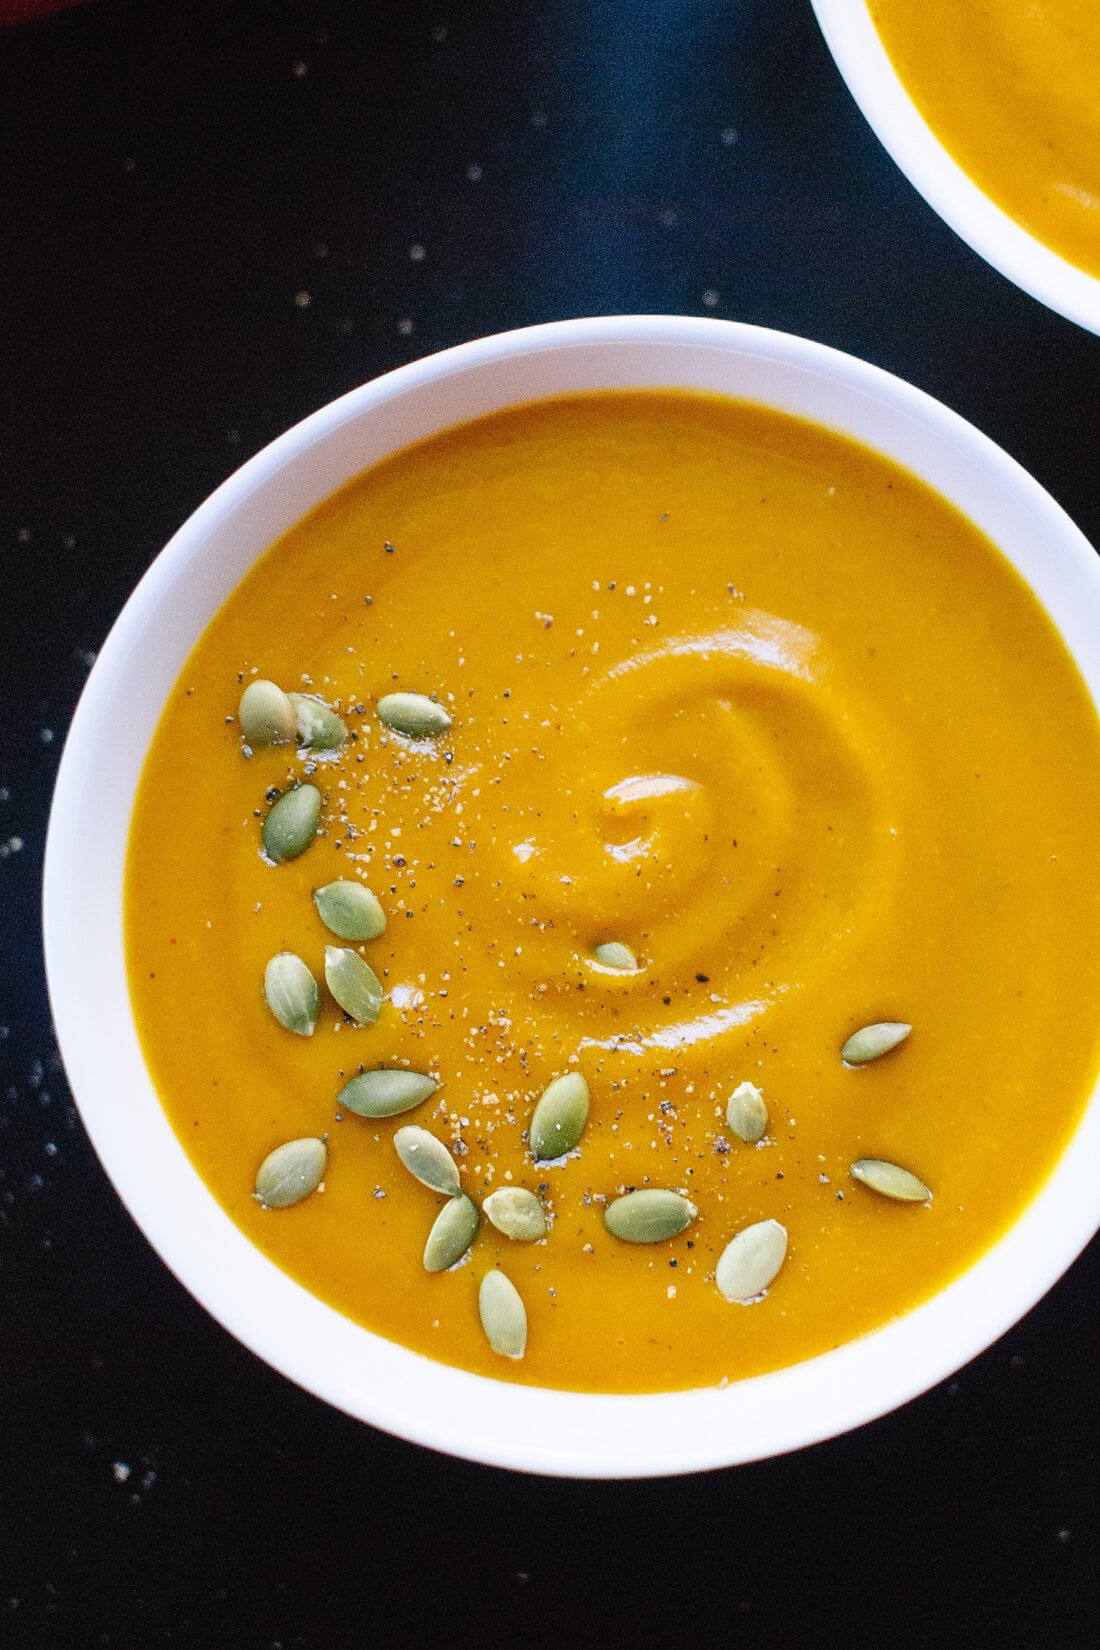 So creamy, you won't believe this roasted pumpkin soup recipe doesn't contain any cream! #dairyfree